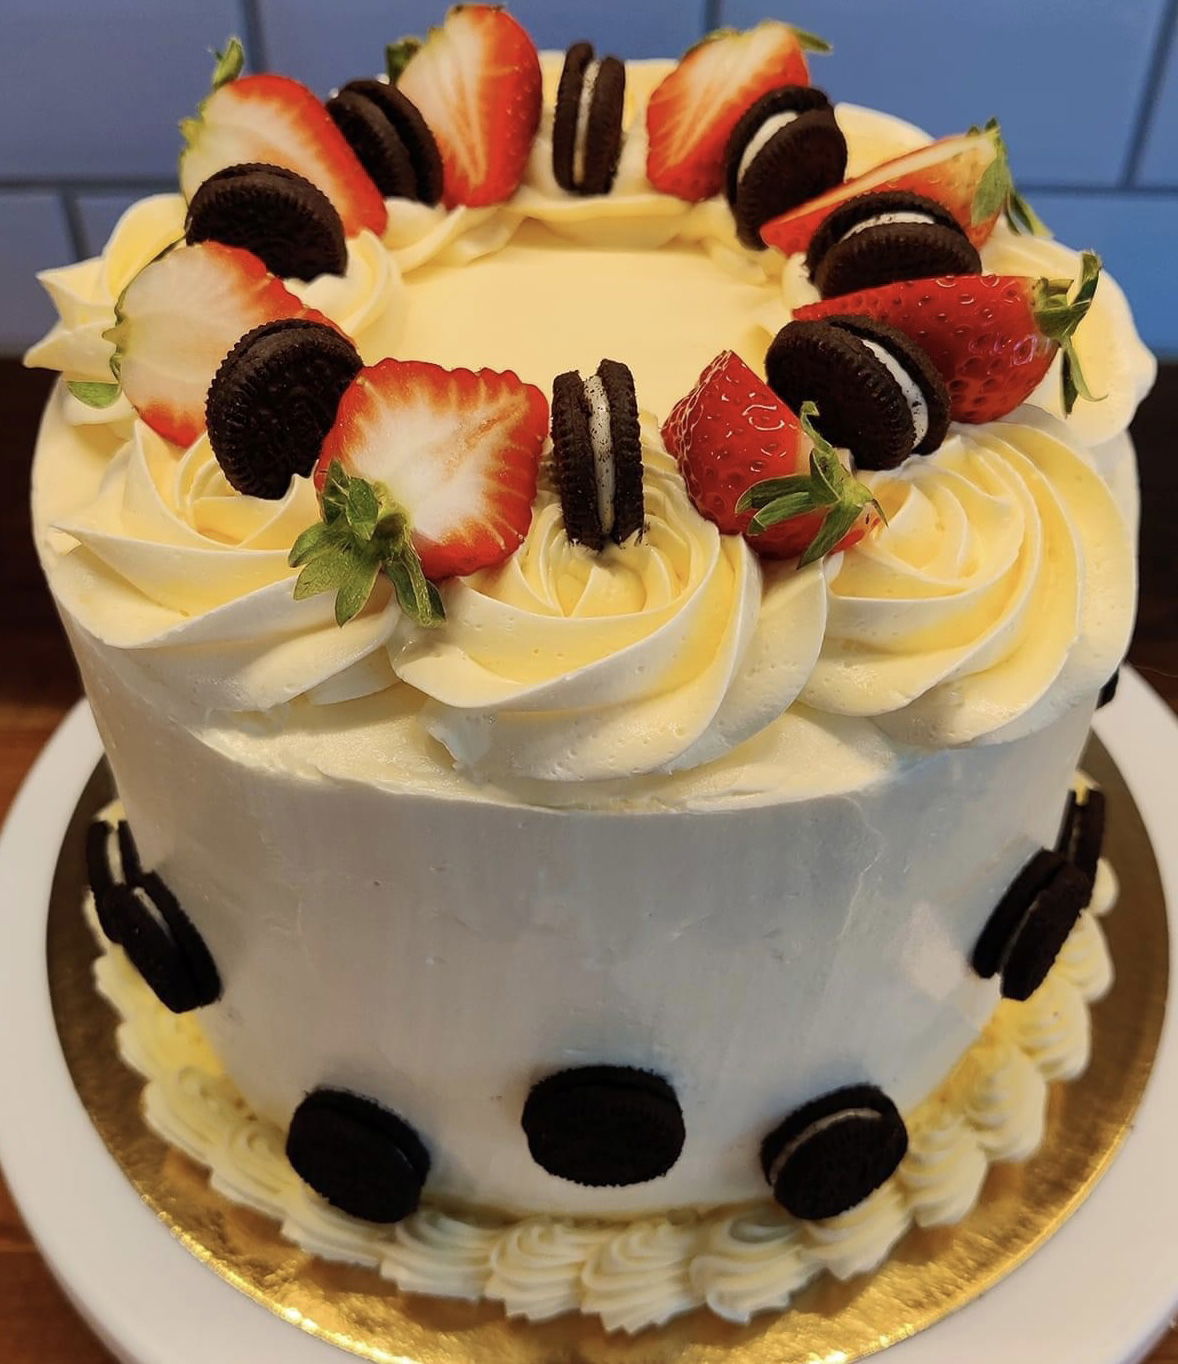 3 Layer Chocolate Cake with Buttercream Frosting, Fresh Strawberries, and Oreo Cookies